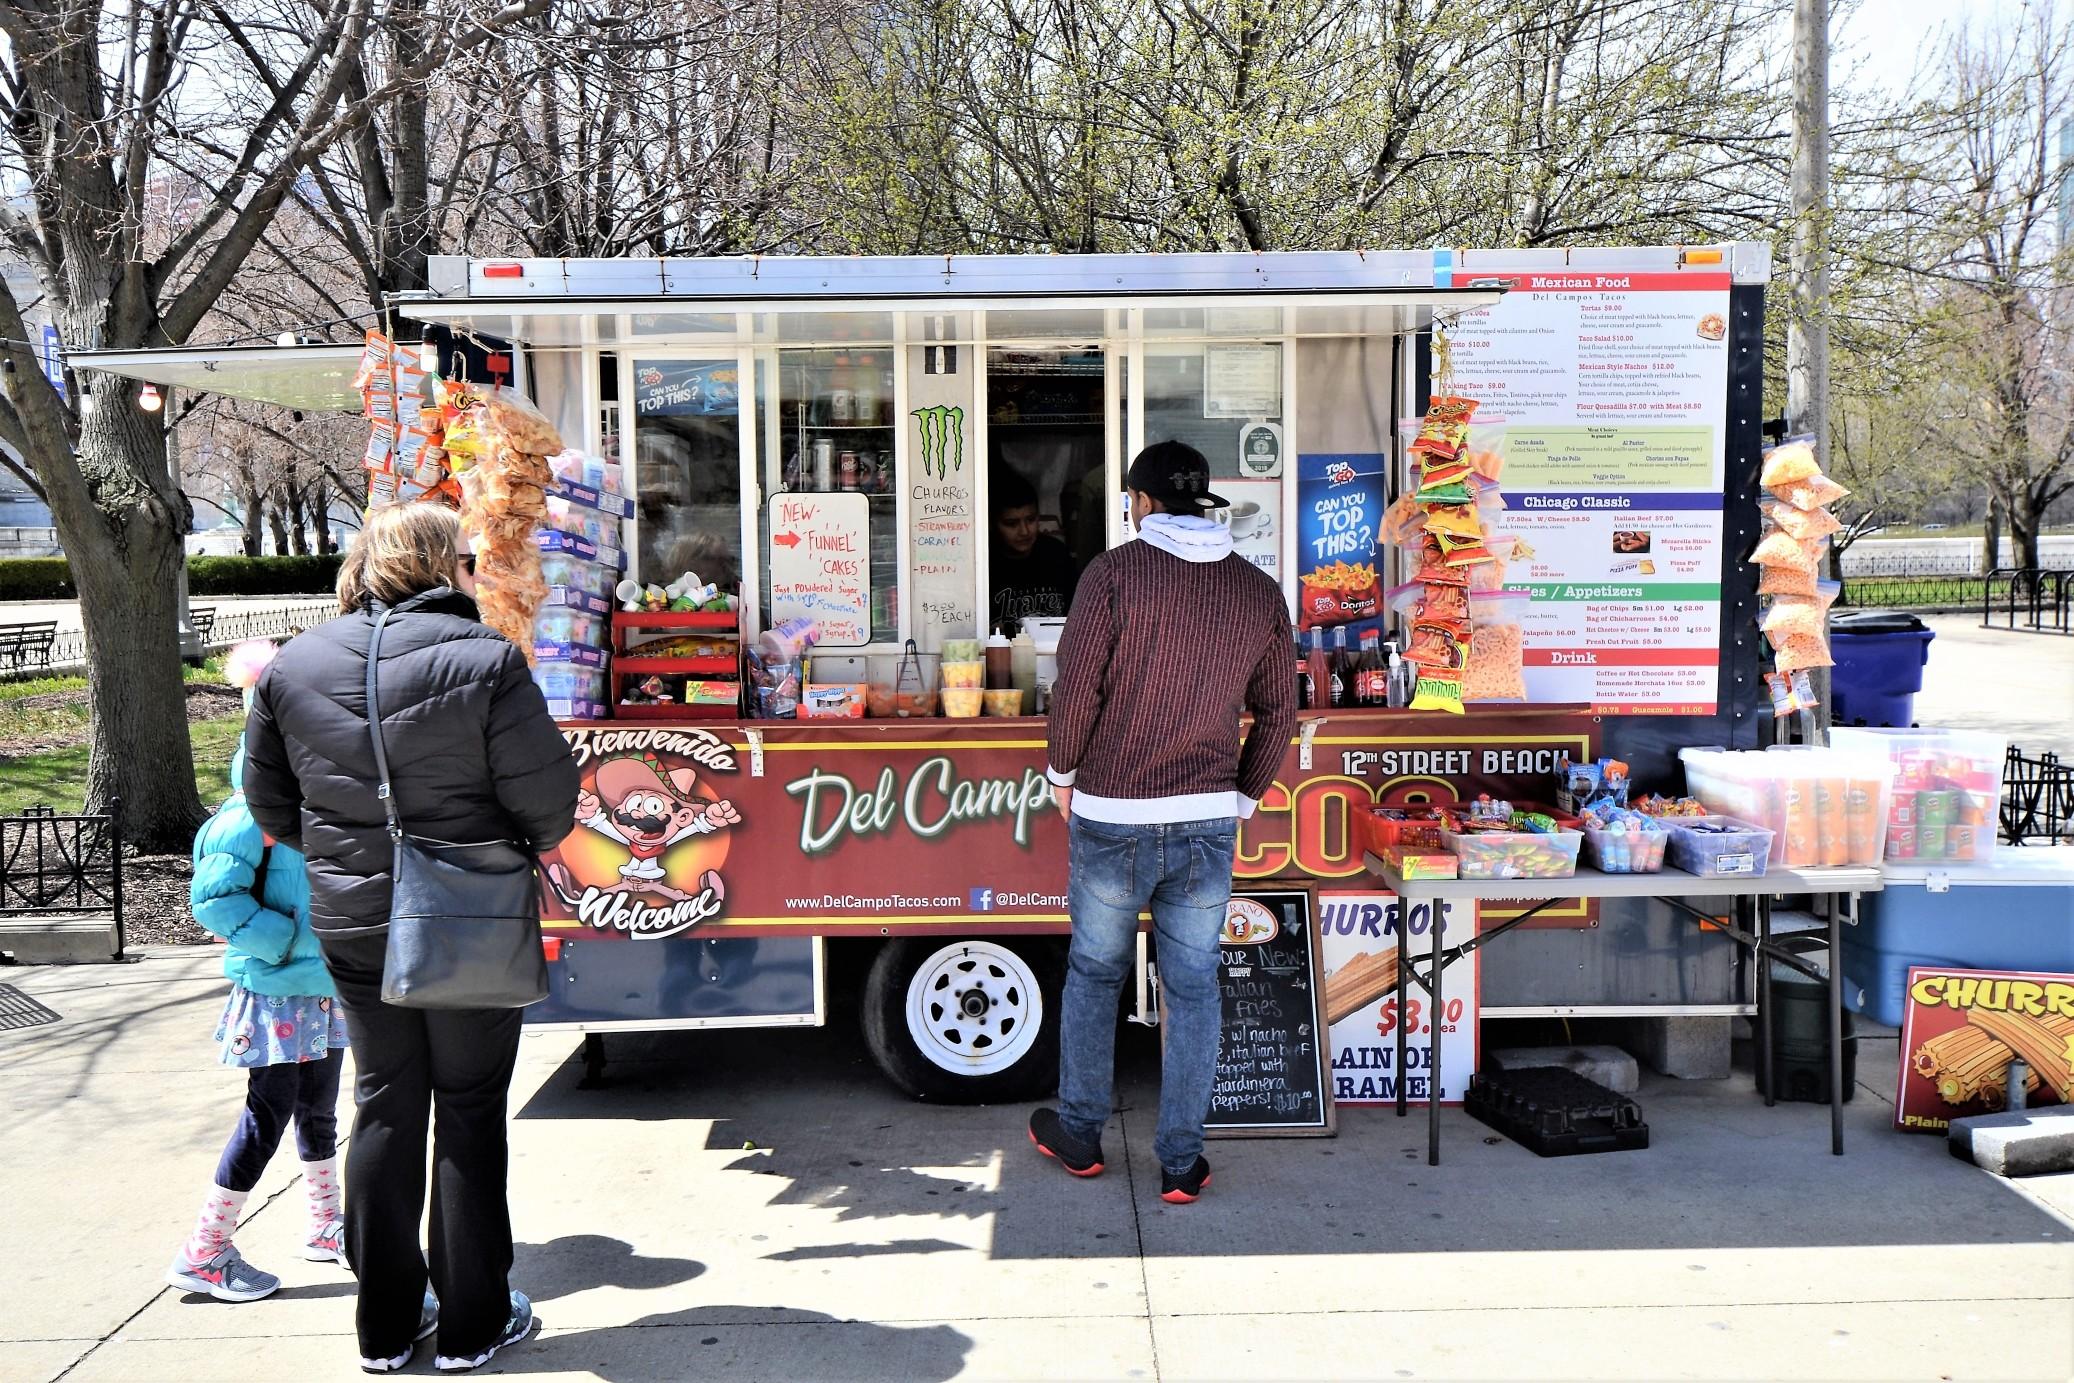 A food truck in Chicago